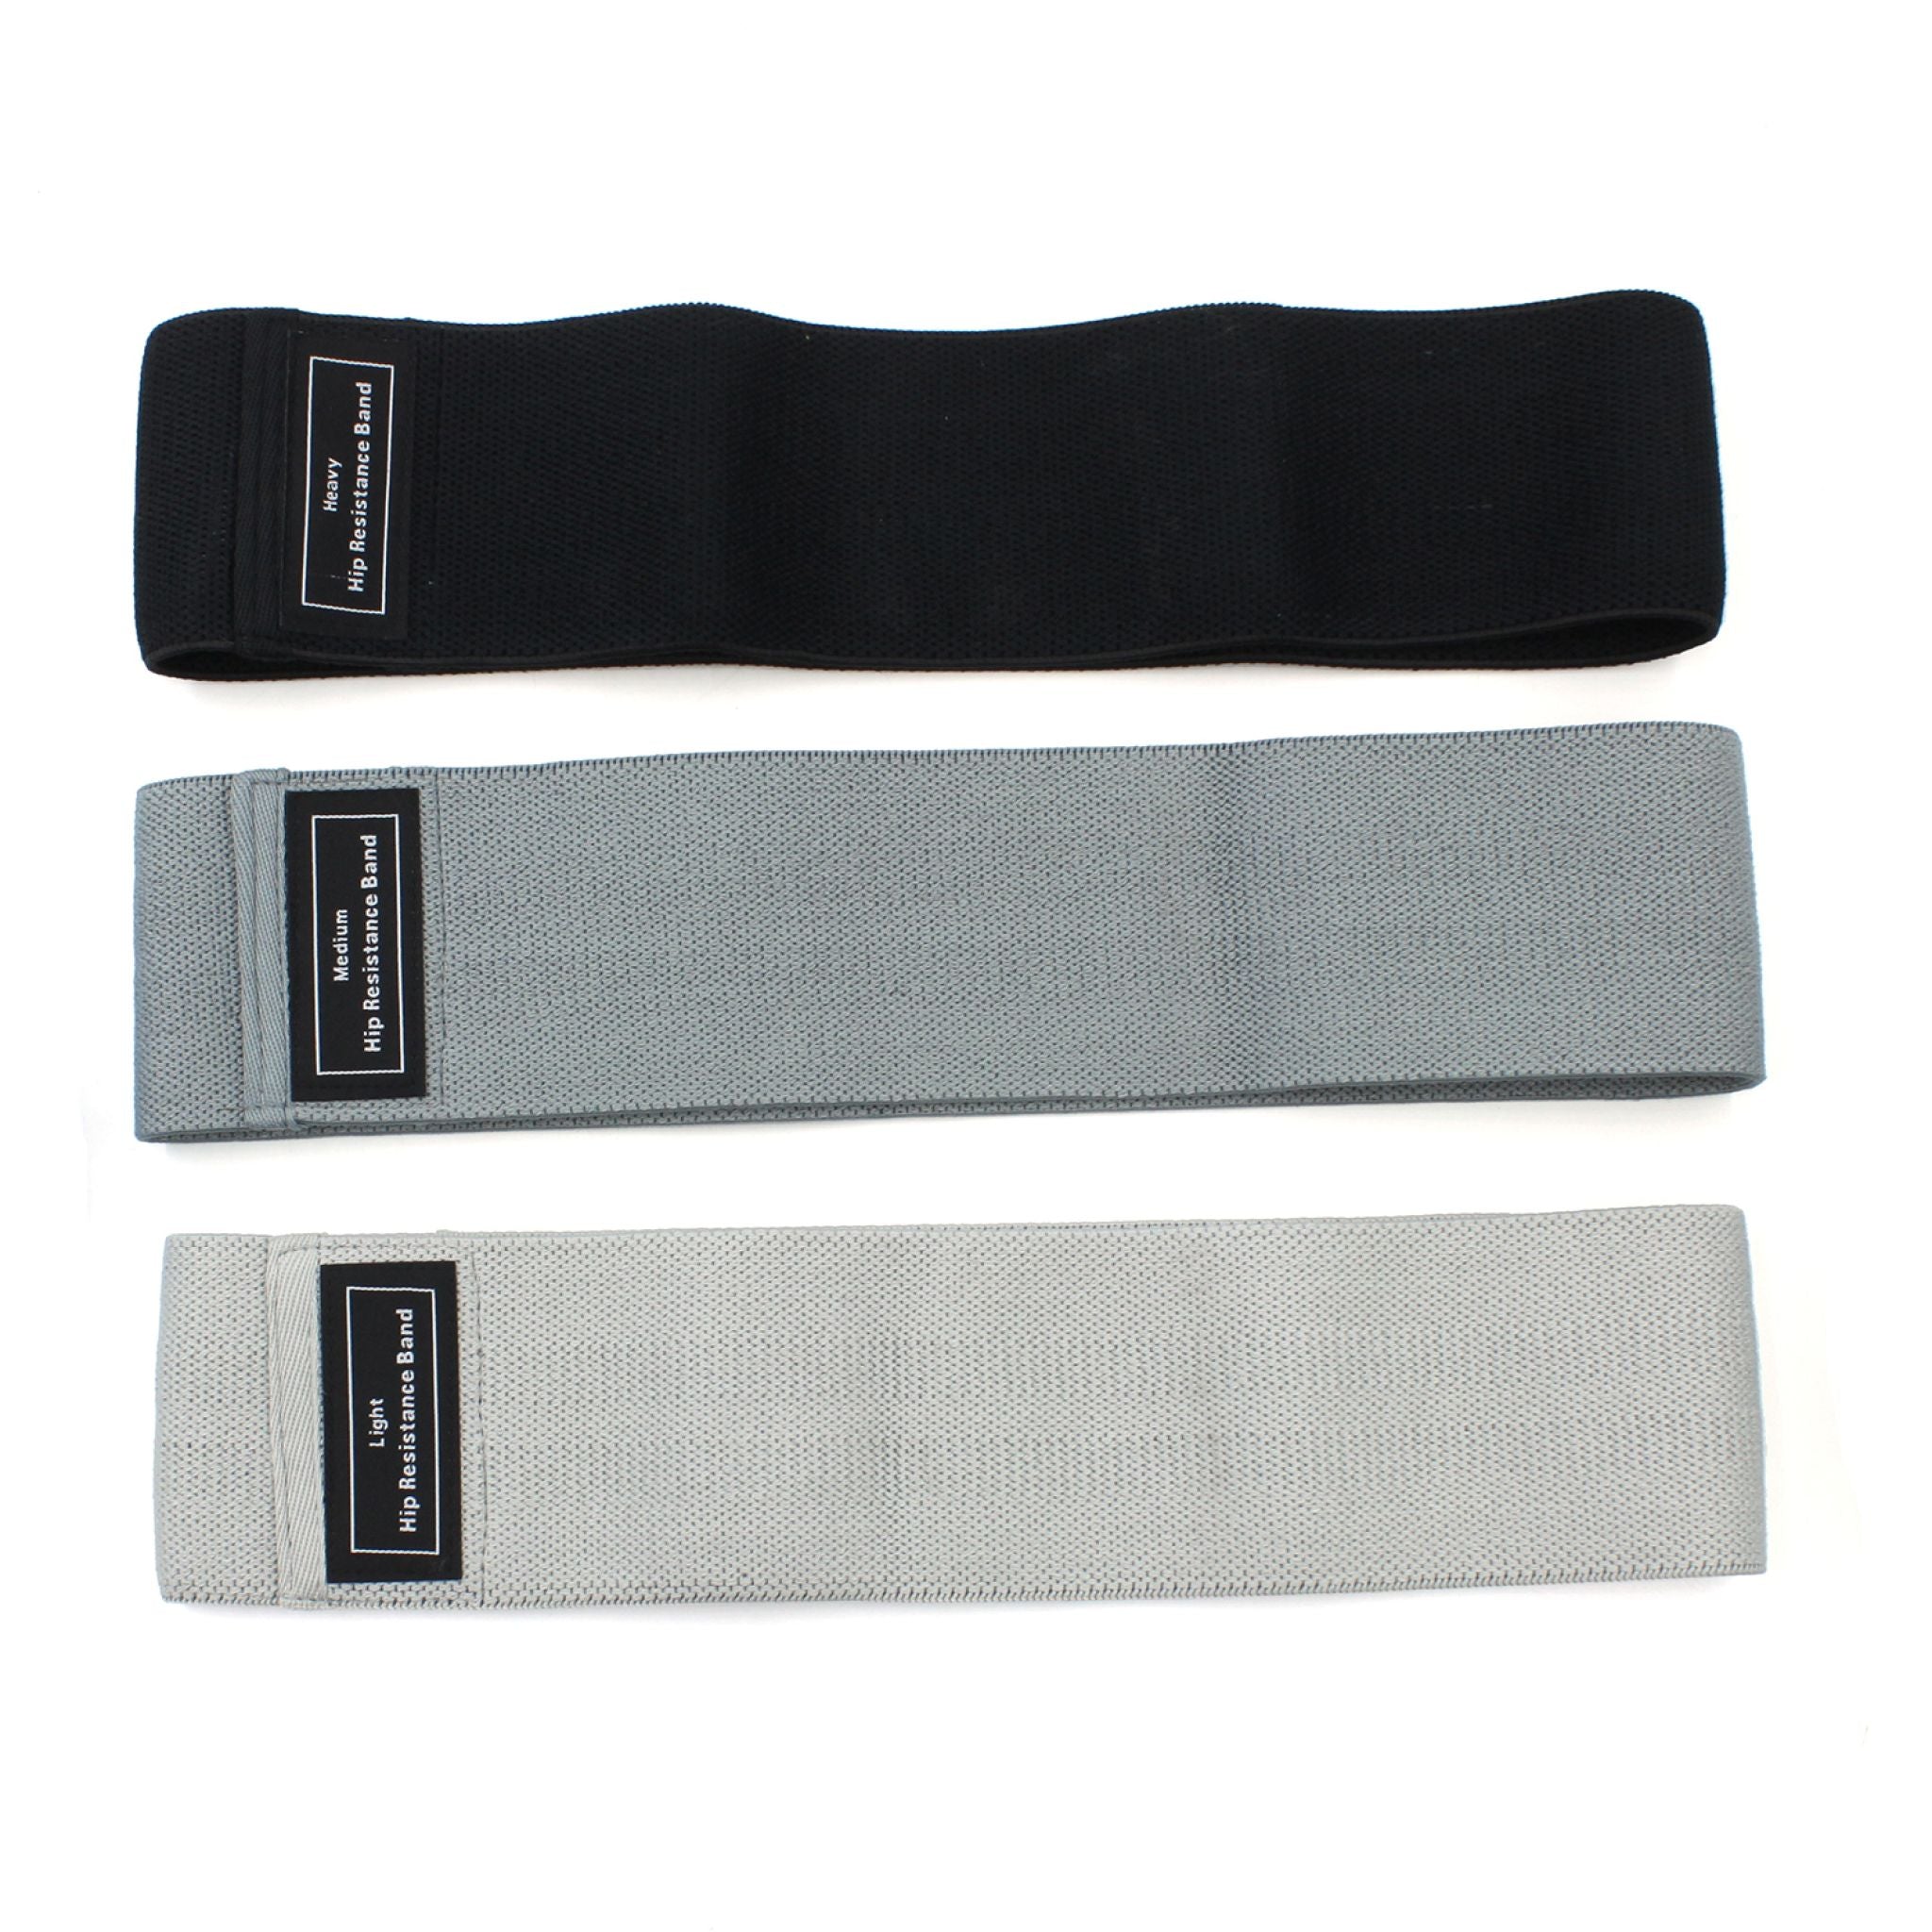 Fabric Hip Resistance Band Set of Black, Gray, and Light Gray